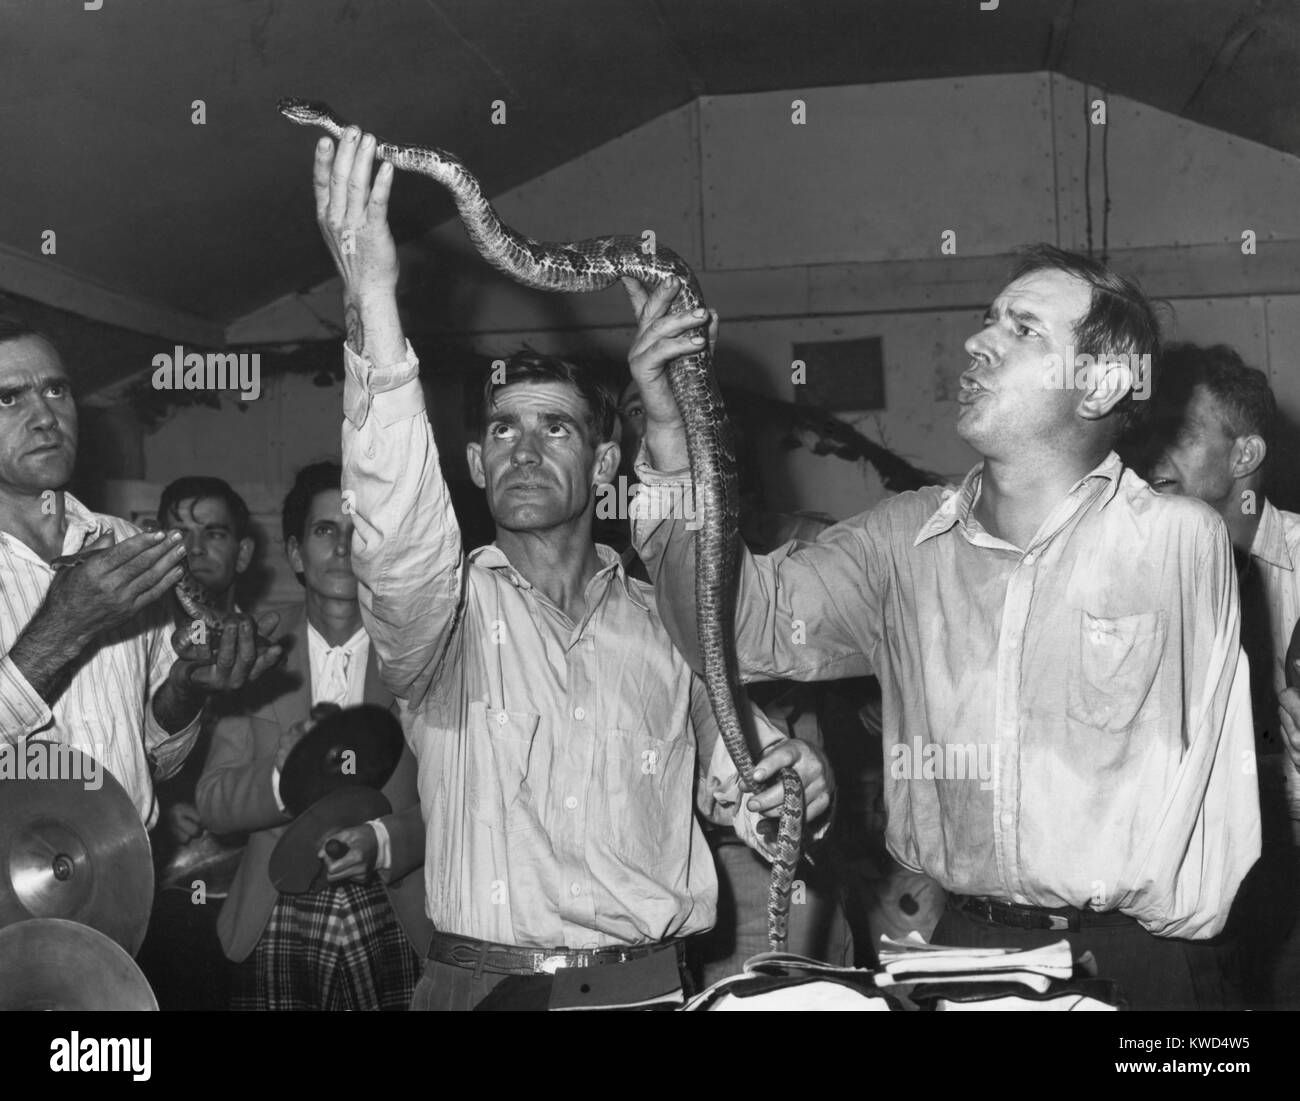 Men Handling serpents at the Pentecostal Church of God. Snake handling was a test of the worshipper's faith, introduced to Appalachia in the early 20th century by George Went Hensley. Lejunior, Harlan County, Kentucky. Sept. 15, 1946. Photo by Russell Lee. (BSLOC 2014 13 185) Stock Photo